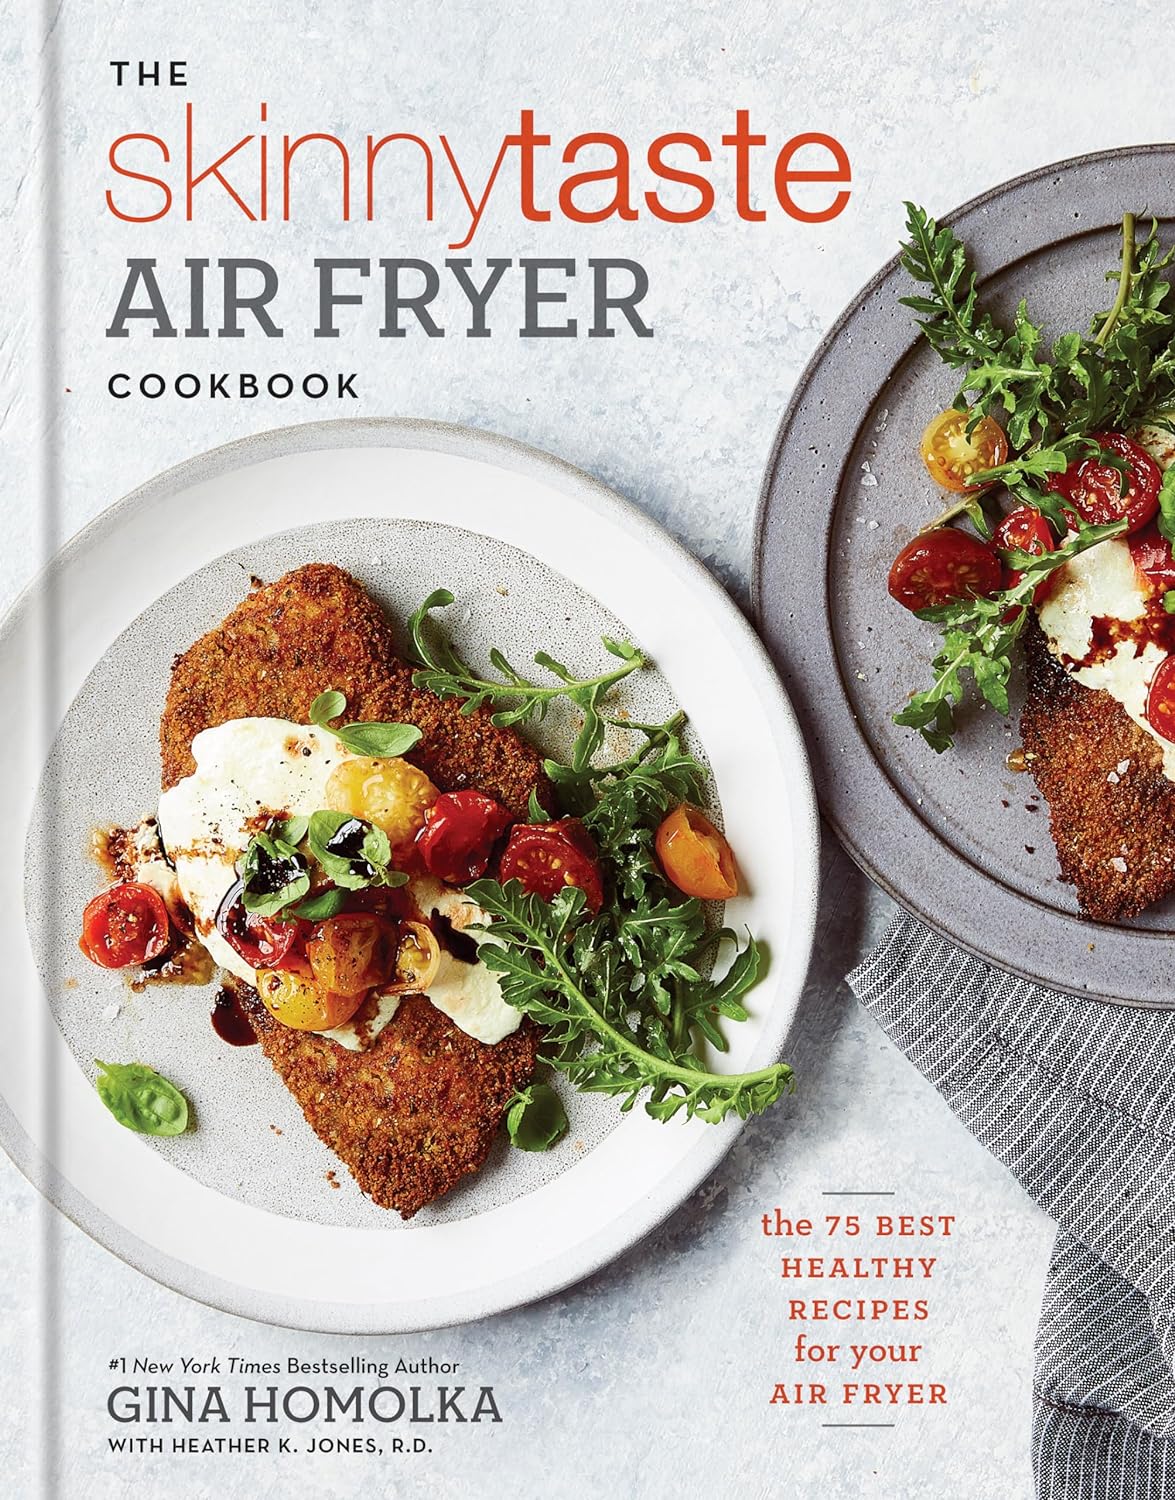 The Skinnytaste Air Fryer Cookbook: The 75 Best Healthy Recipes for Your Air Fryer - by Gina Homolka (Hardcover)